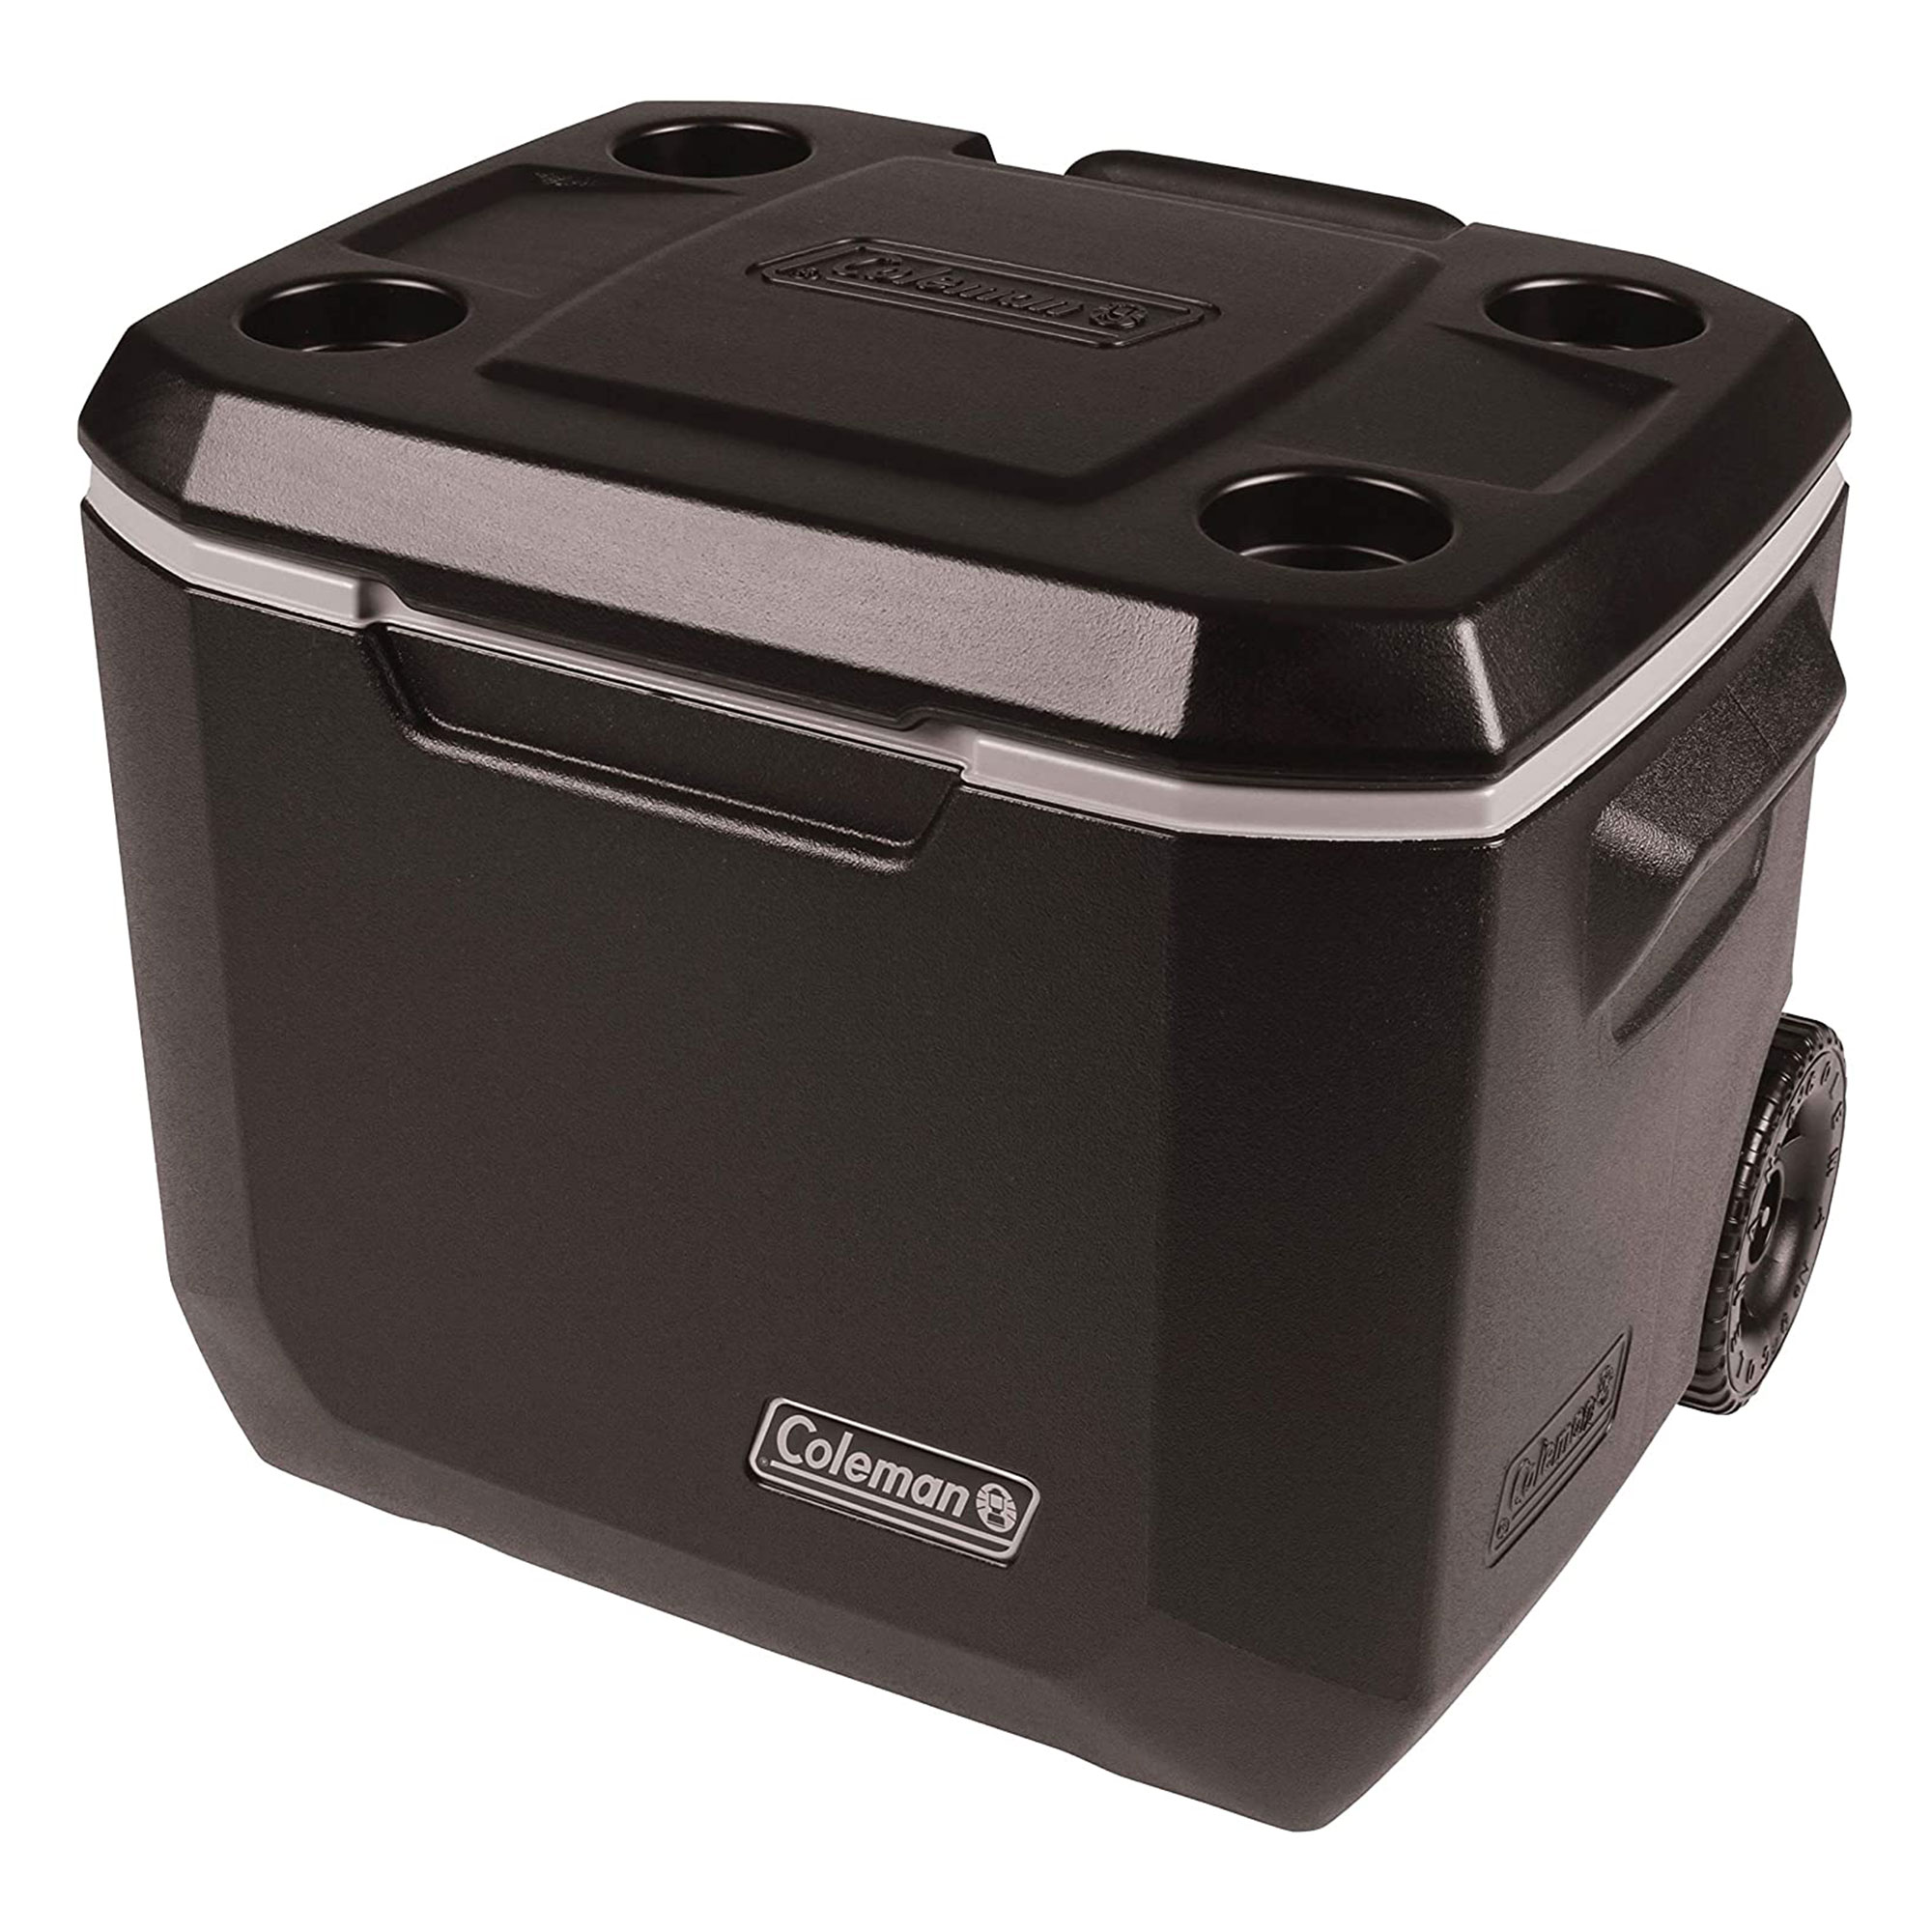 Coleman Xtreme 50 Quart 5-Day Hard Cooler with Wheels and Have-A-Seat Lid - image 1 of 9